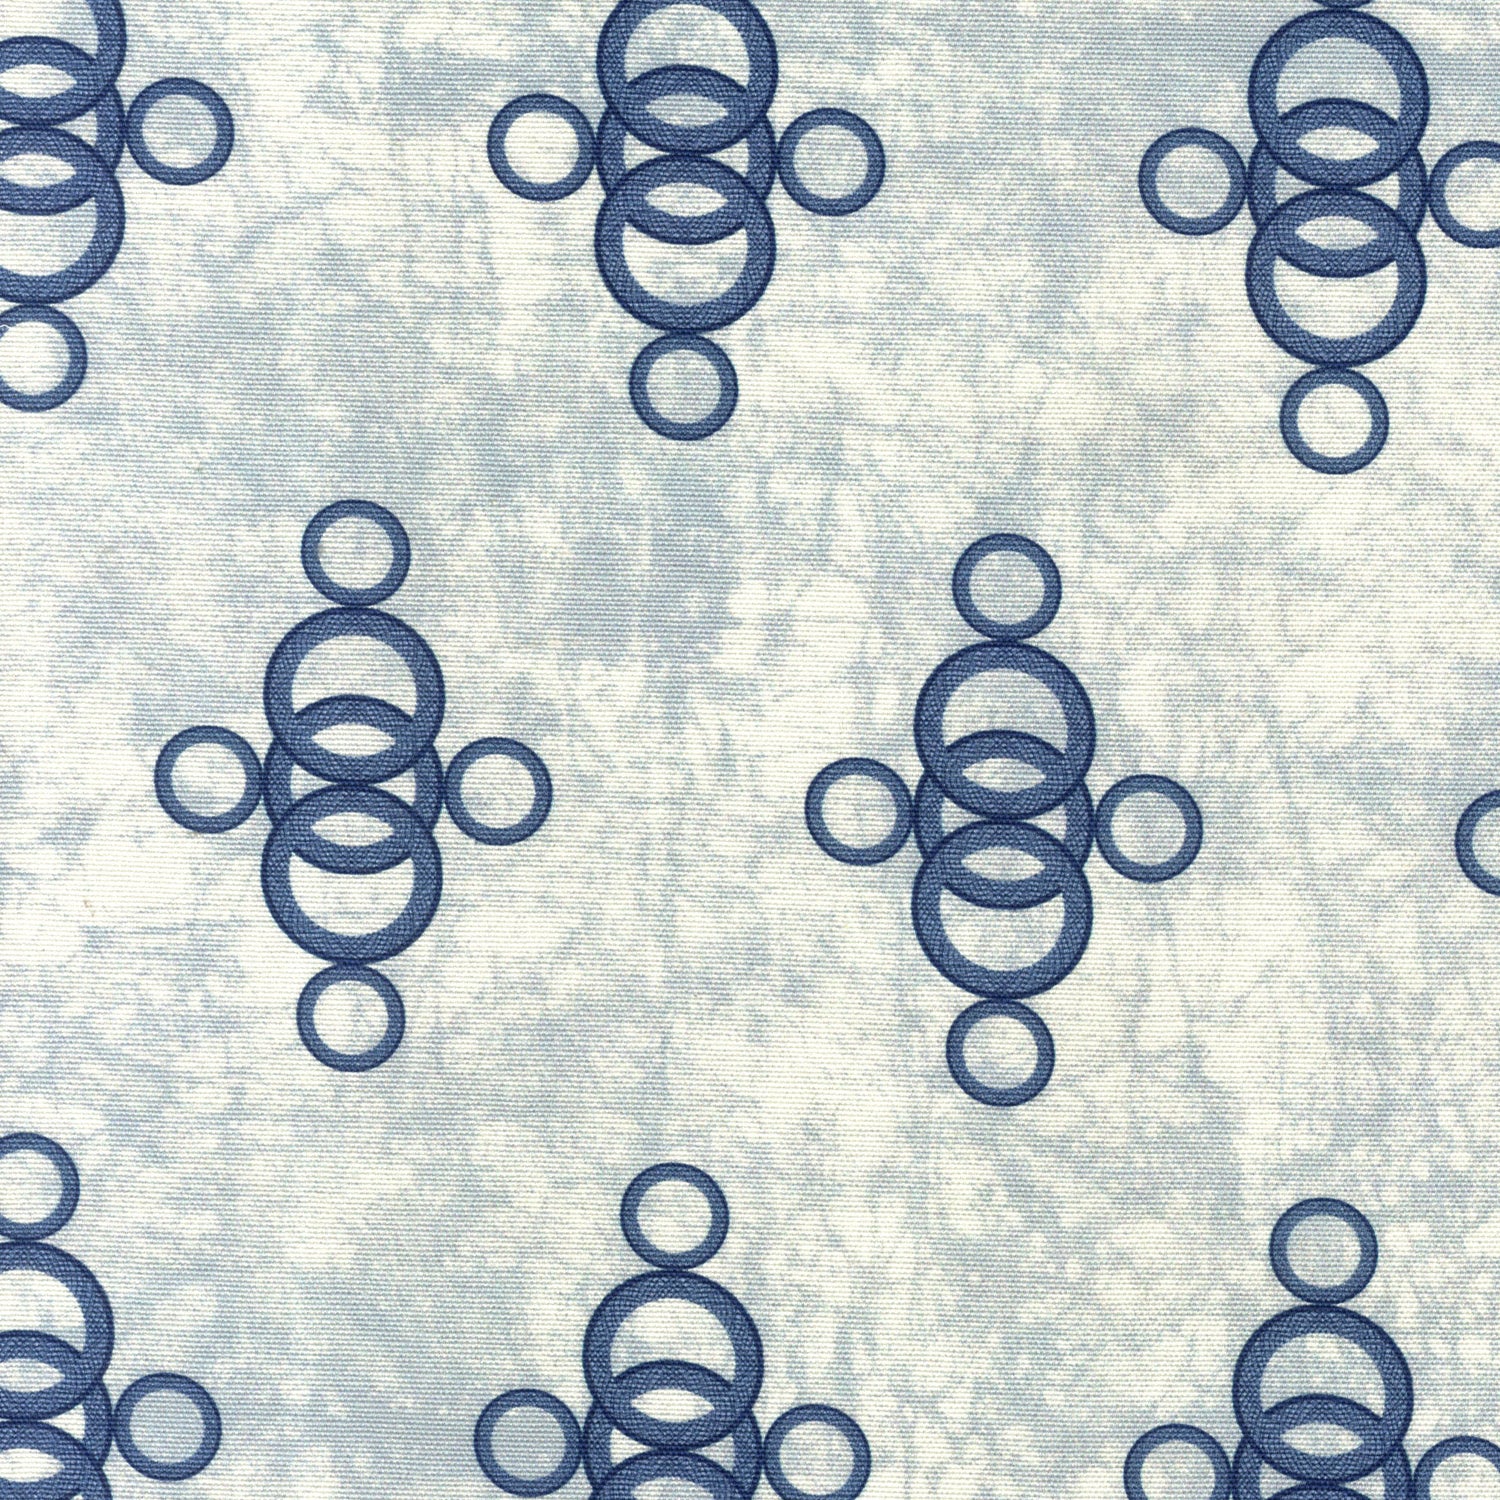 Detail of fabric in a curving lattice print in navy on a mottled blue field.